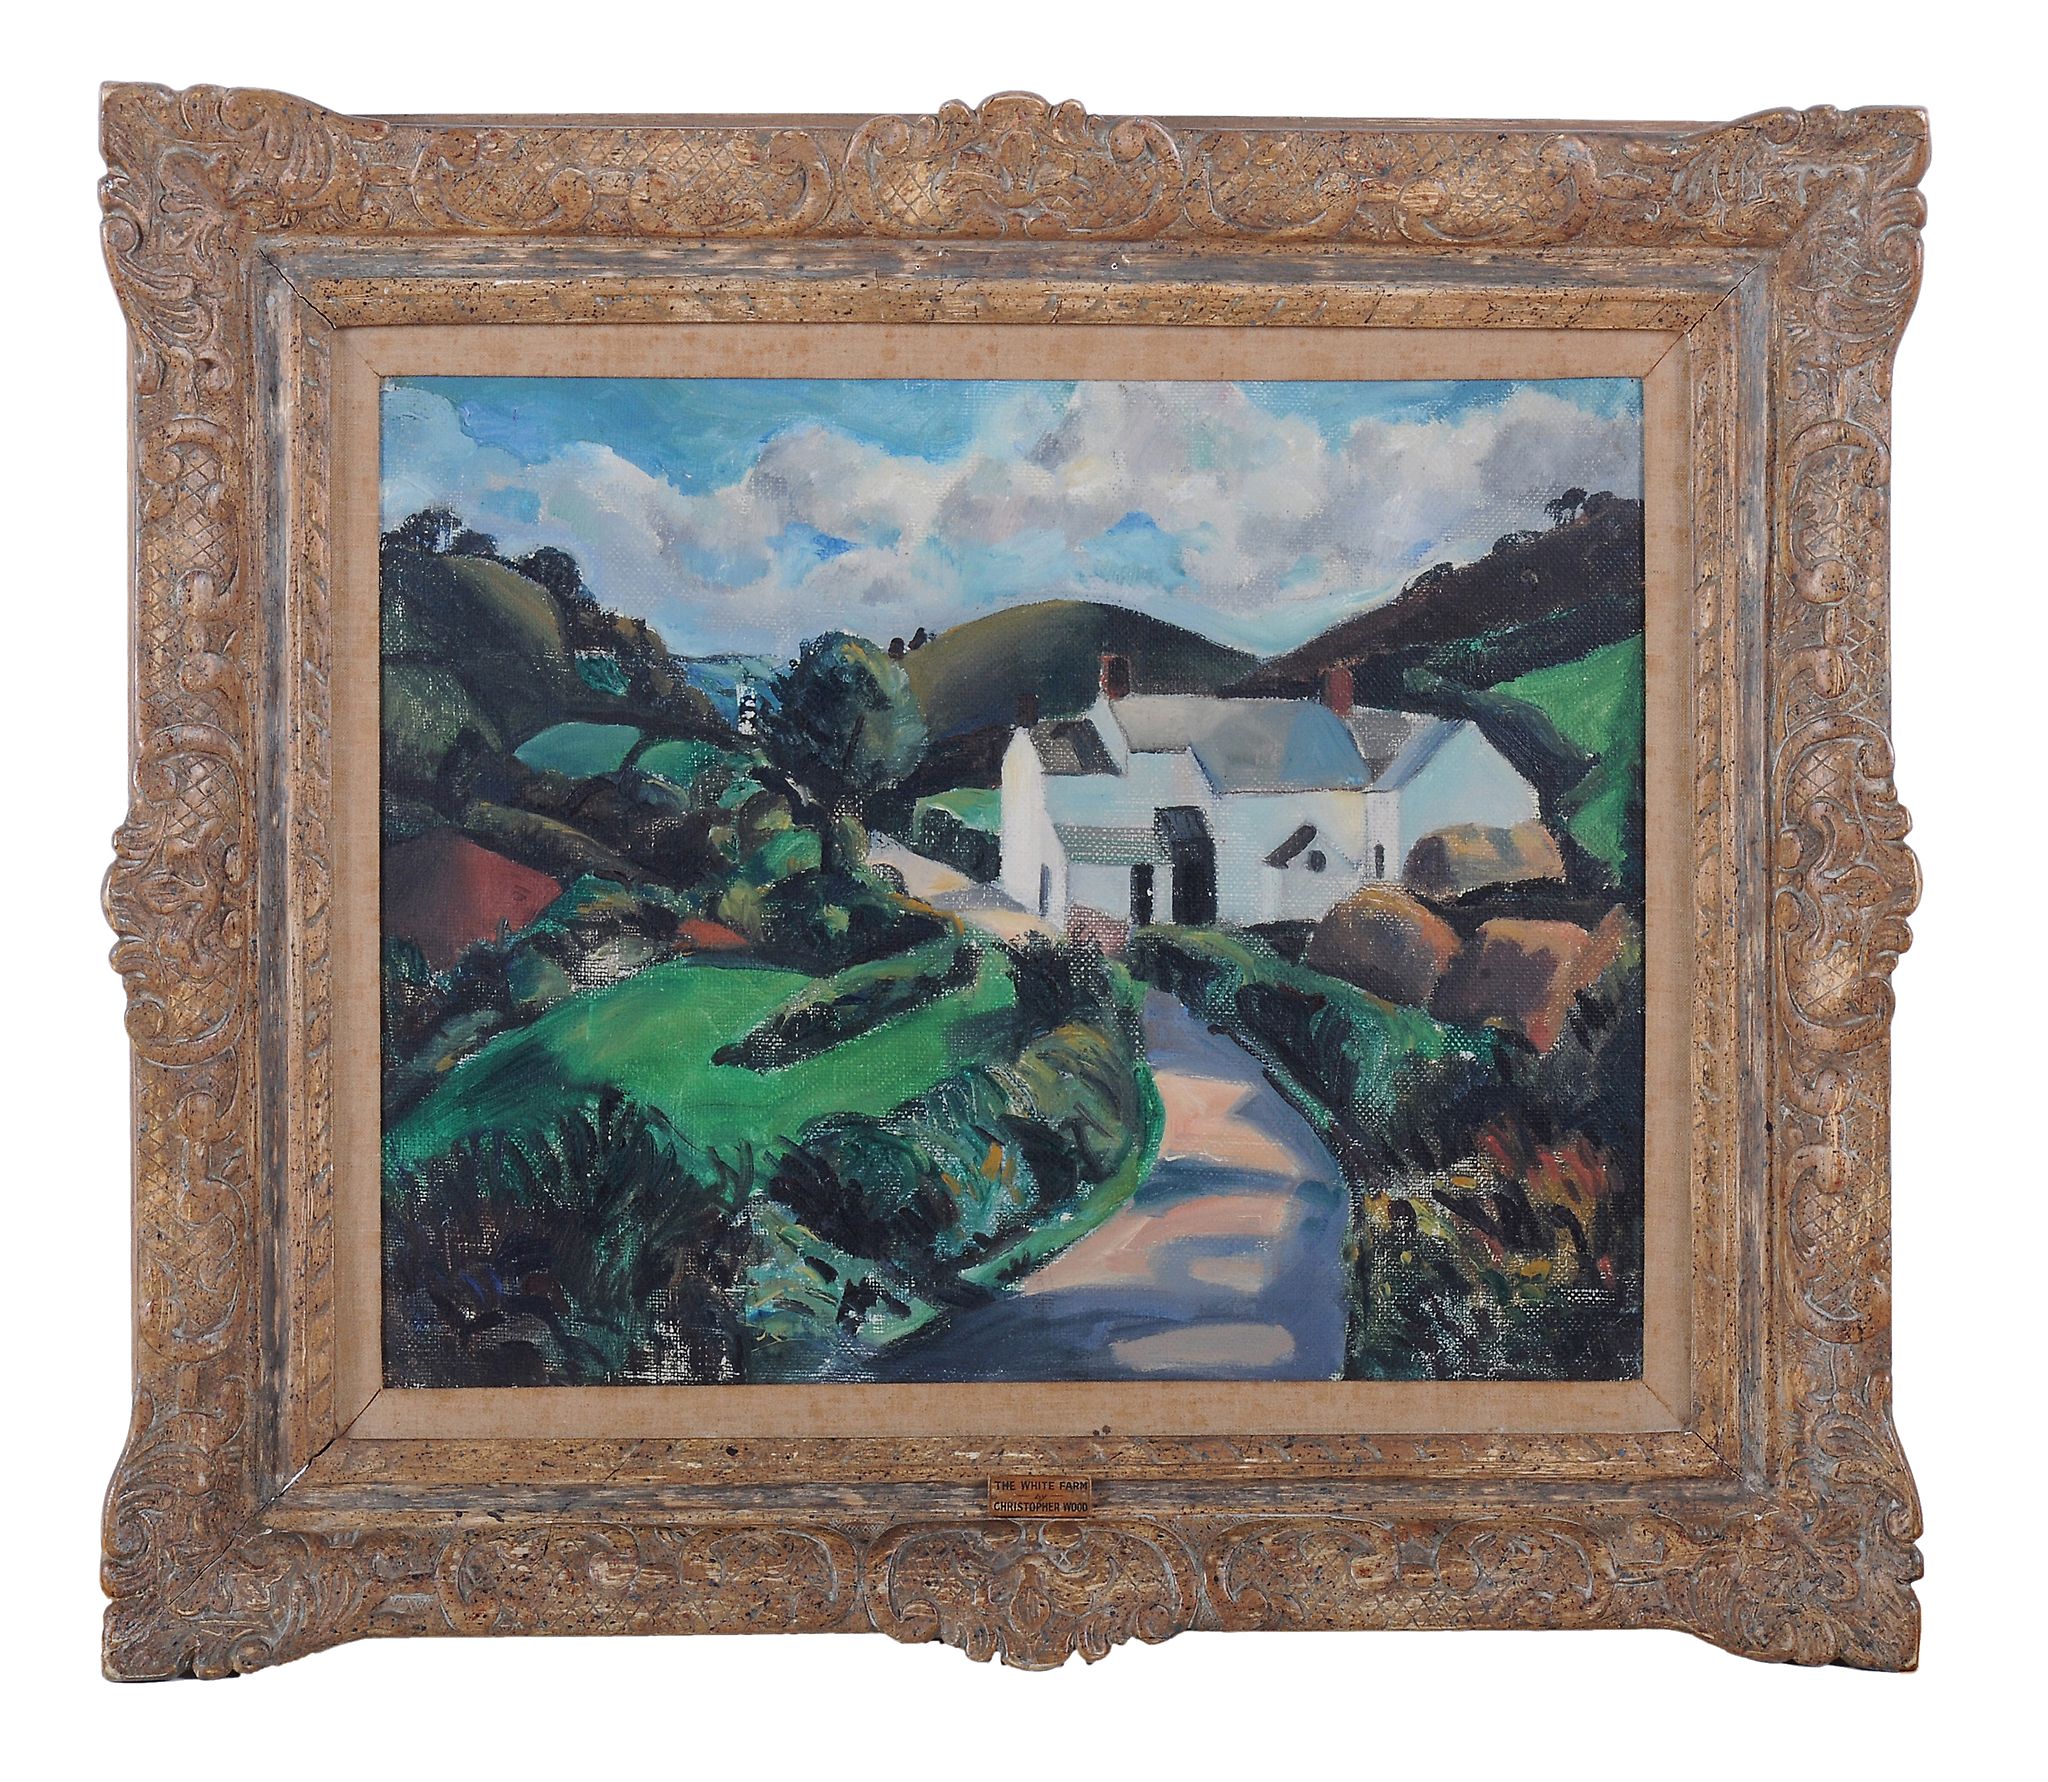 Christopher Wood (1901 - 1930) - The White Farm Oil on canvas 41 x 51.5 cm. (16 1/8 x 20 1/4 in.) - Image 2 of 3